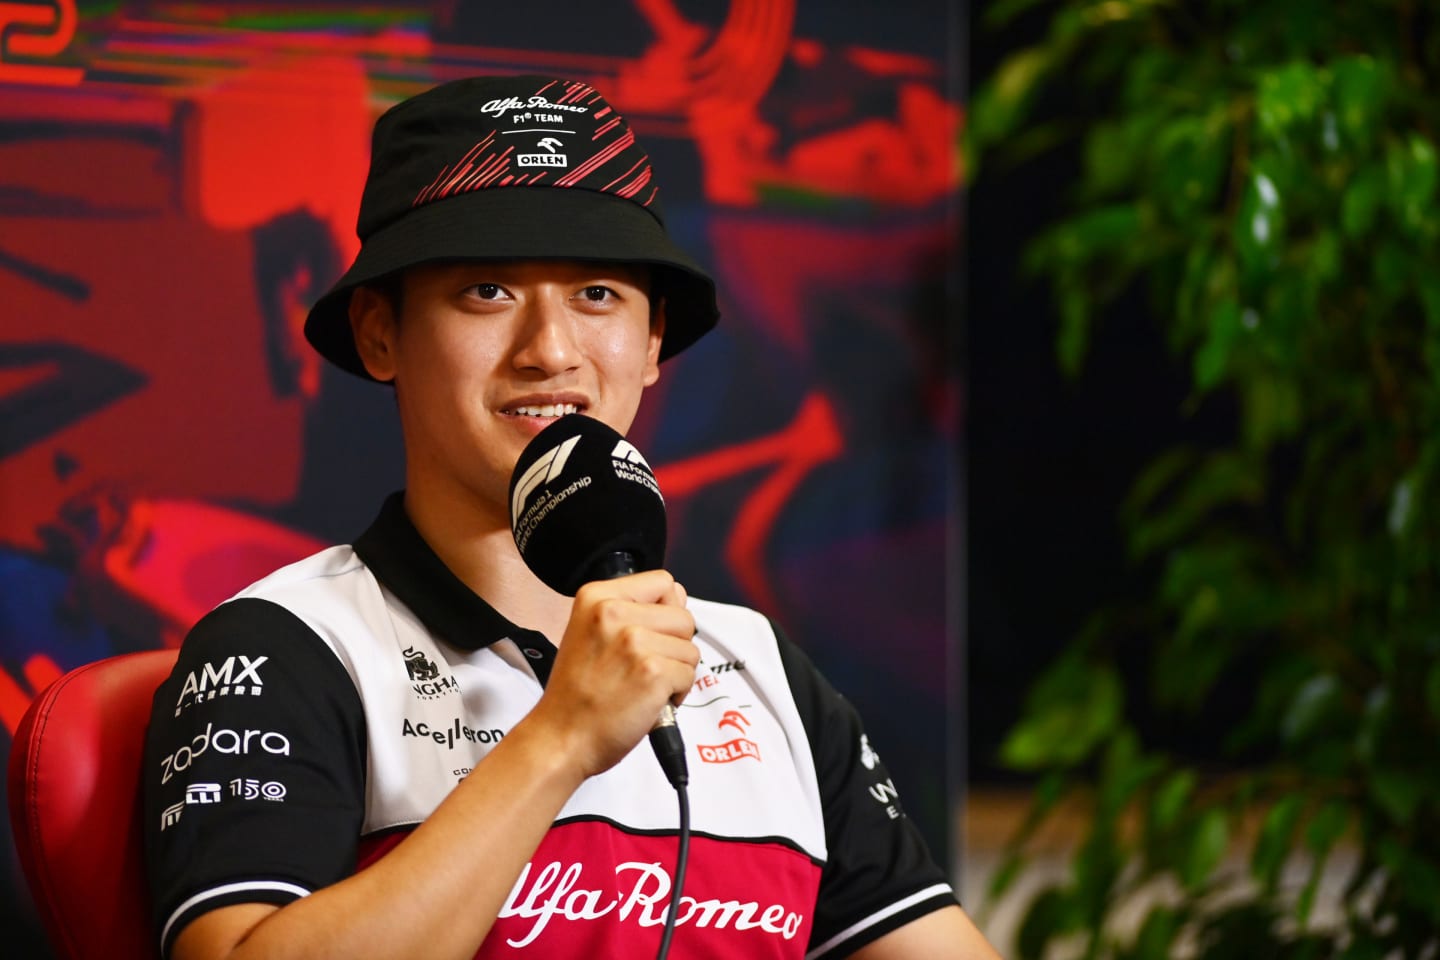 MONZA, ITALY - SEPTEMBER 08: Zhou Guanyu of China and Alfa Romeo F1 talks to the media in the